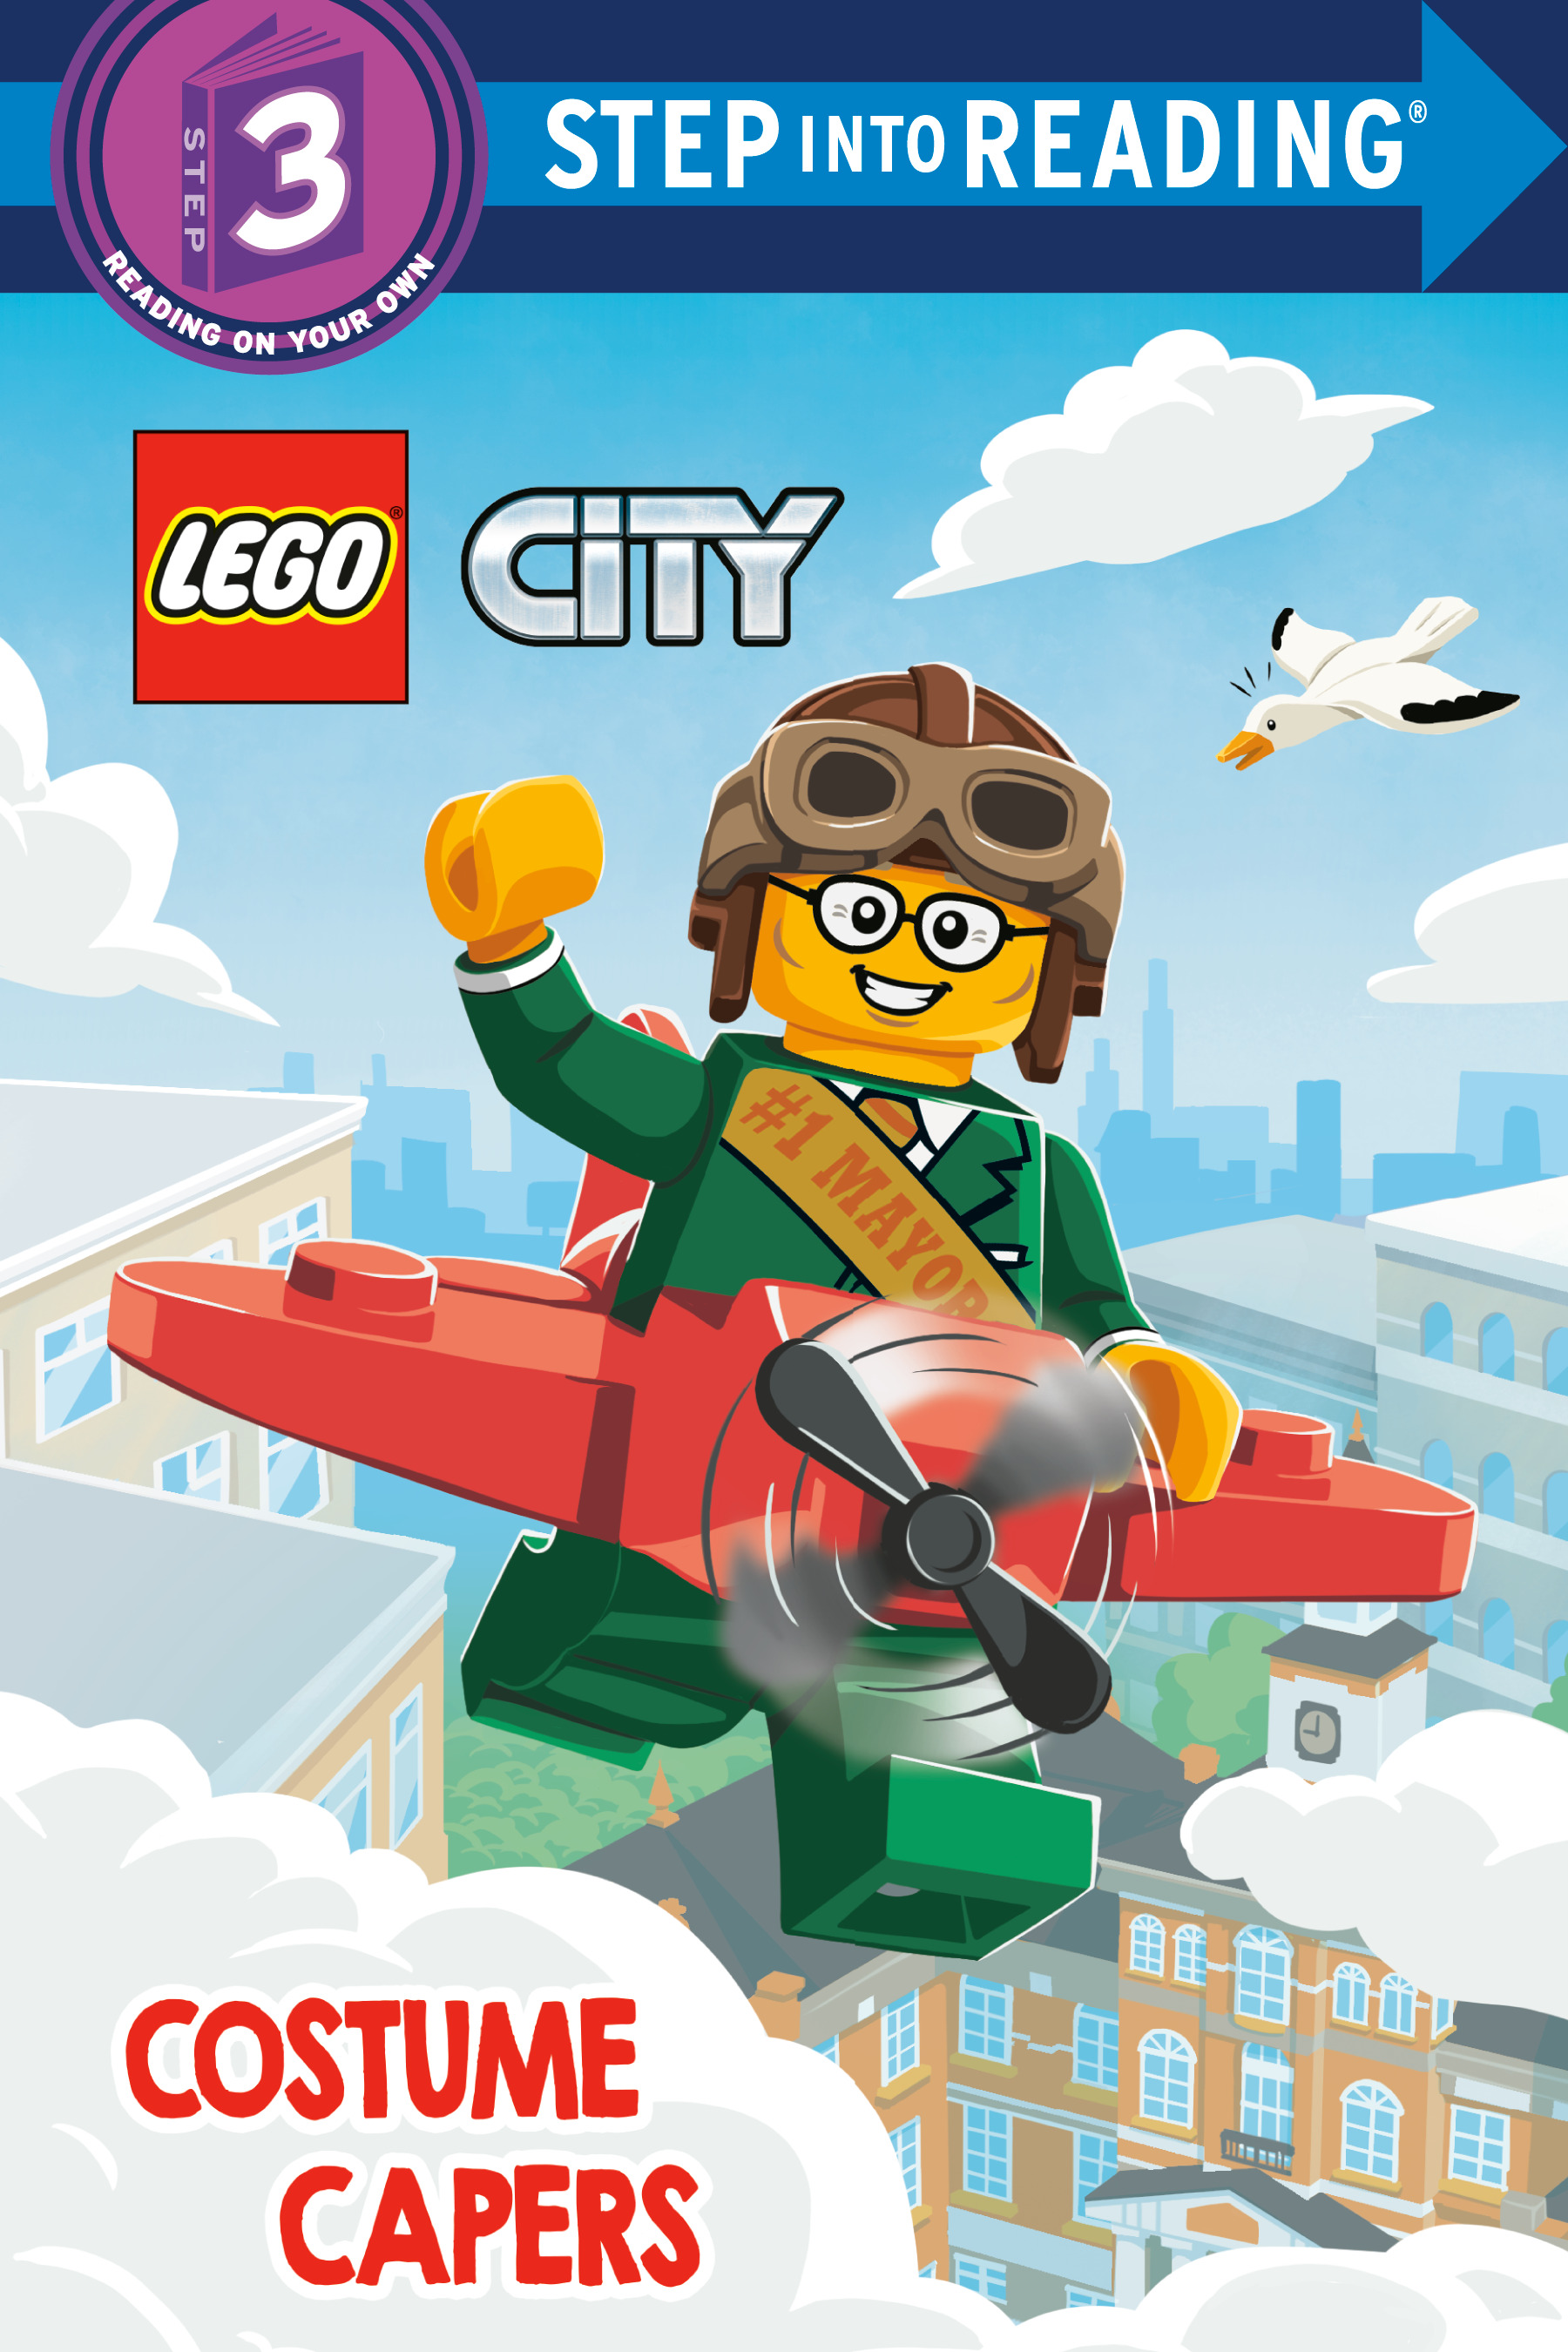 Costume Capers (LEGO City) | Foxe, Steve